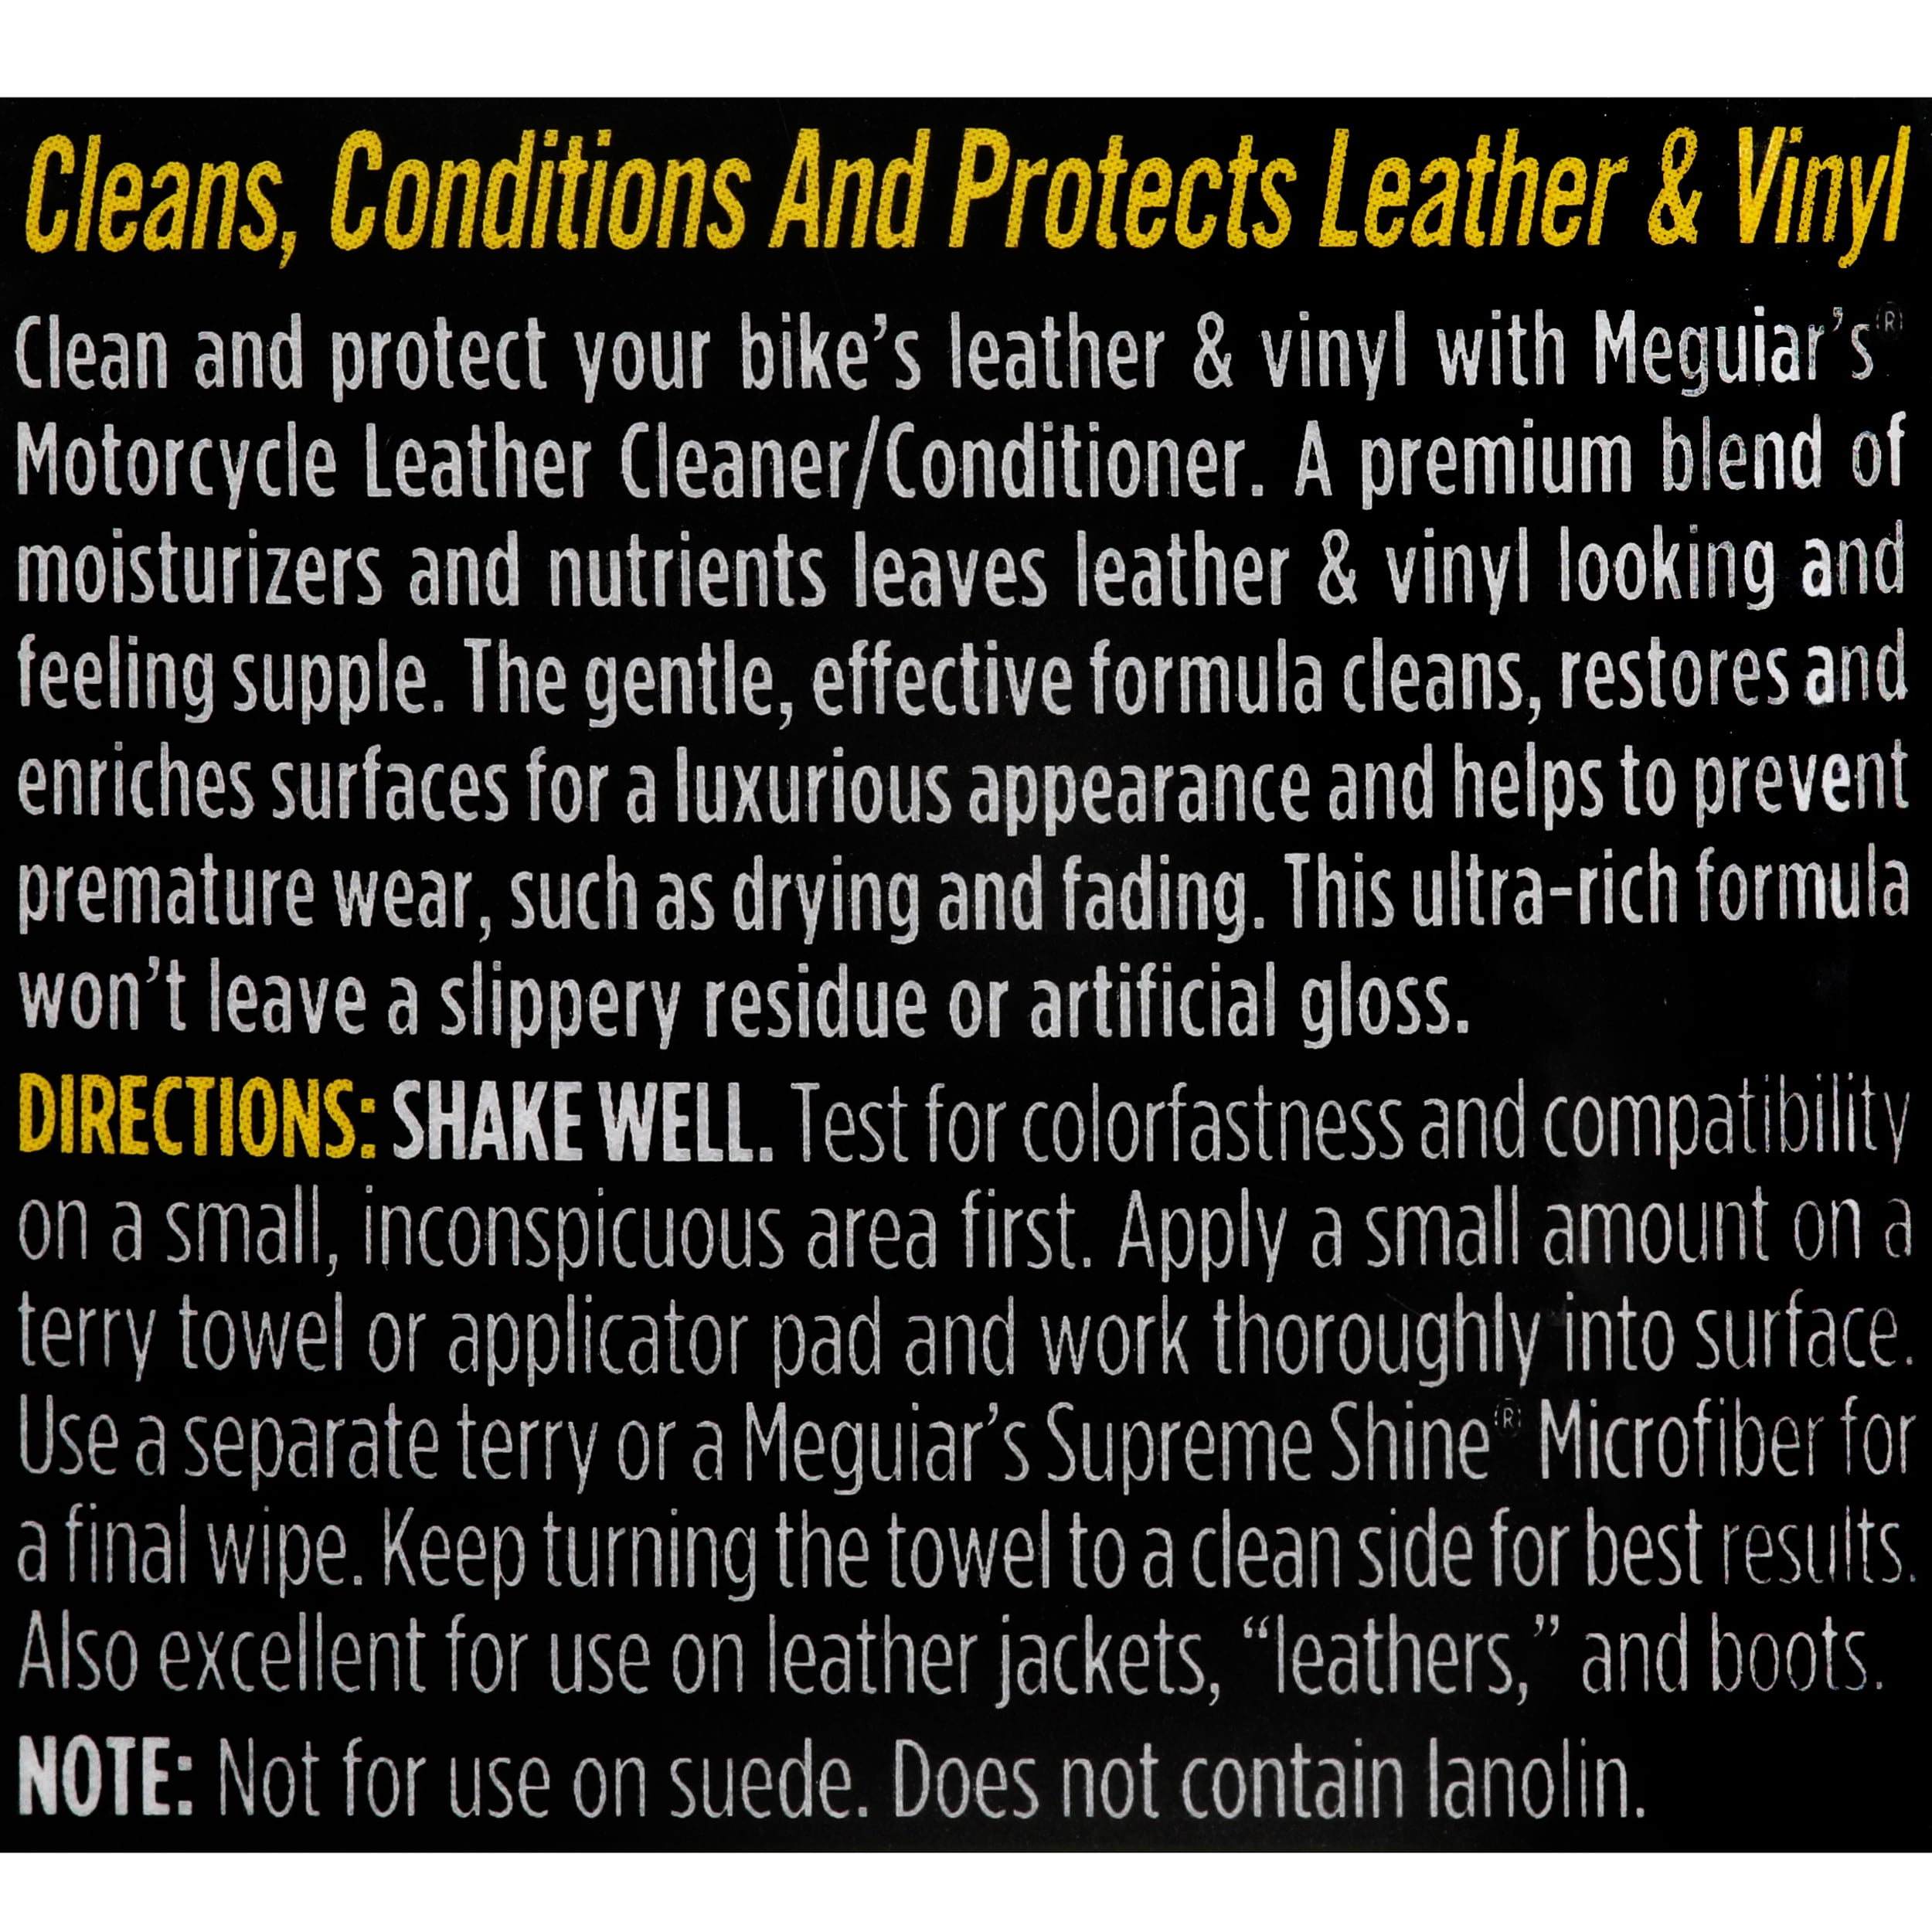 Meguiars MC20306 Motorcycle Leather Cleaner/Conditioner, 6 Fluid